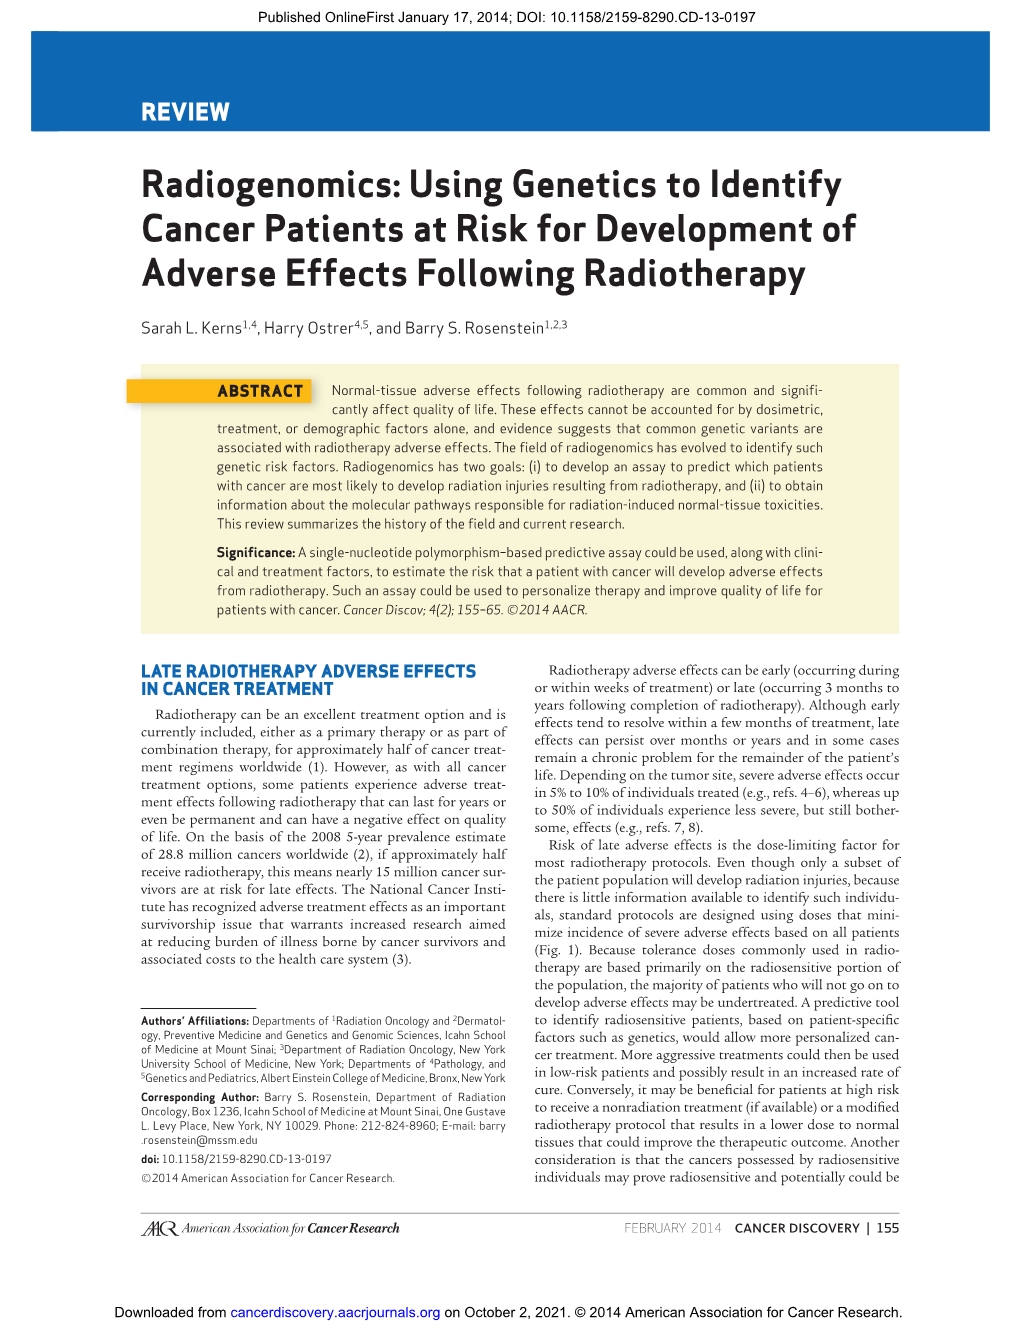 Radiogenomics : Using Genetics to Identify Cancer Patients at Risk for Development of Adverse Effects Following Radiotherapy